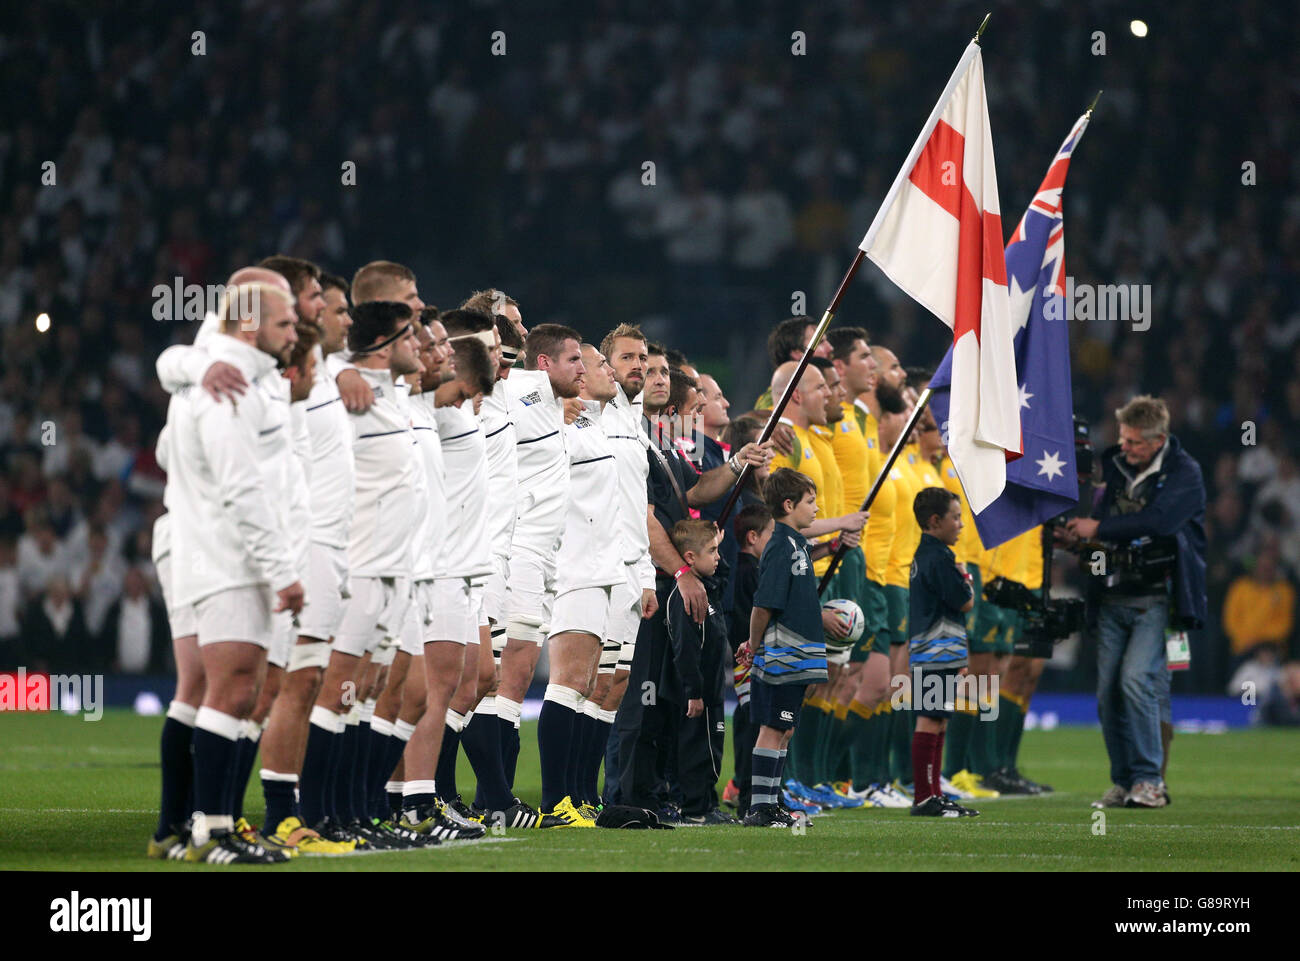 Rugby Union - Rugby World Cup 2015 - Pool A - England v Australia - Twickenham. England and Australia players line up for the national anthems before the World Cup match at Twickenham Stadium, London. Stock Photo